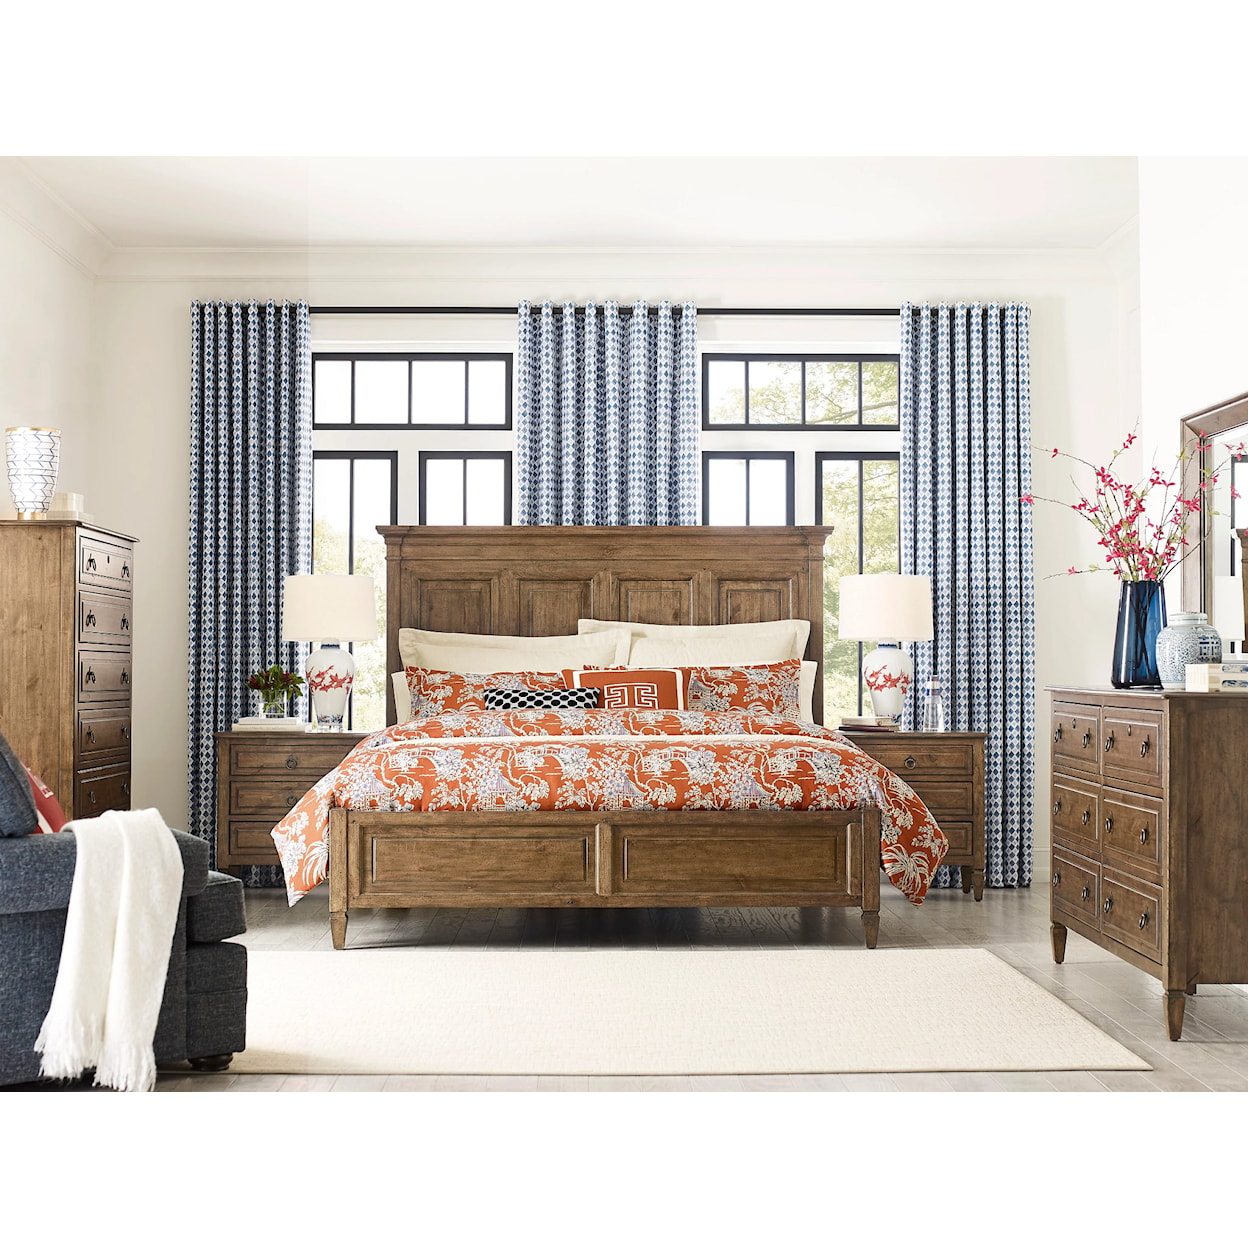 Kincaid Furniture Ansley Hartnell Queen Panel Bed